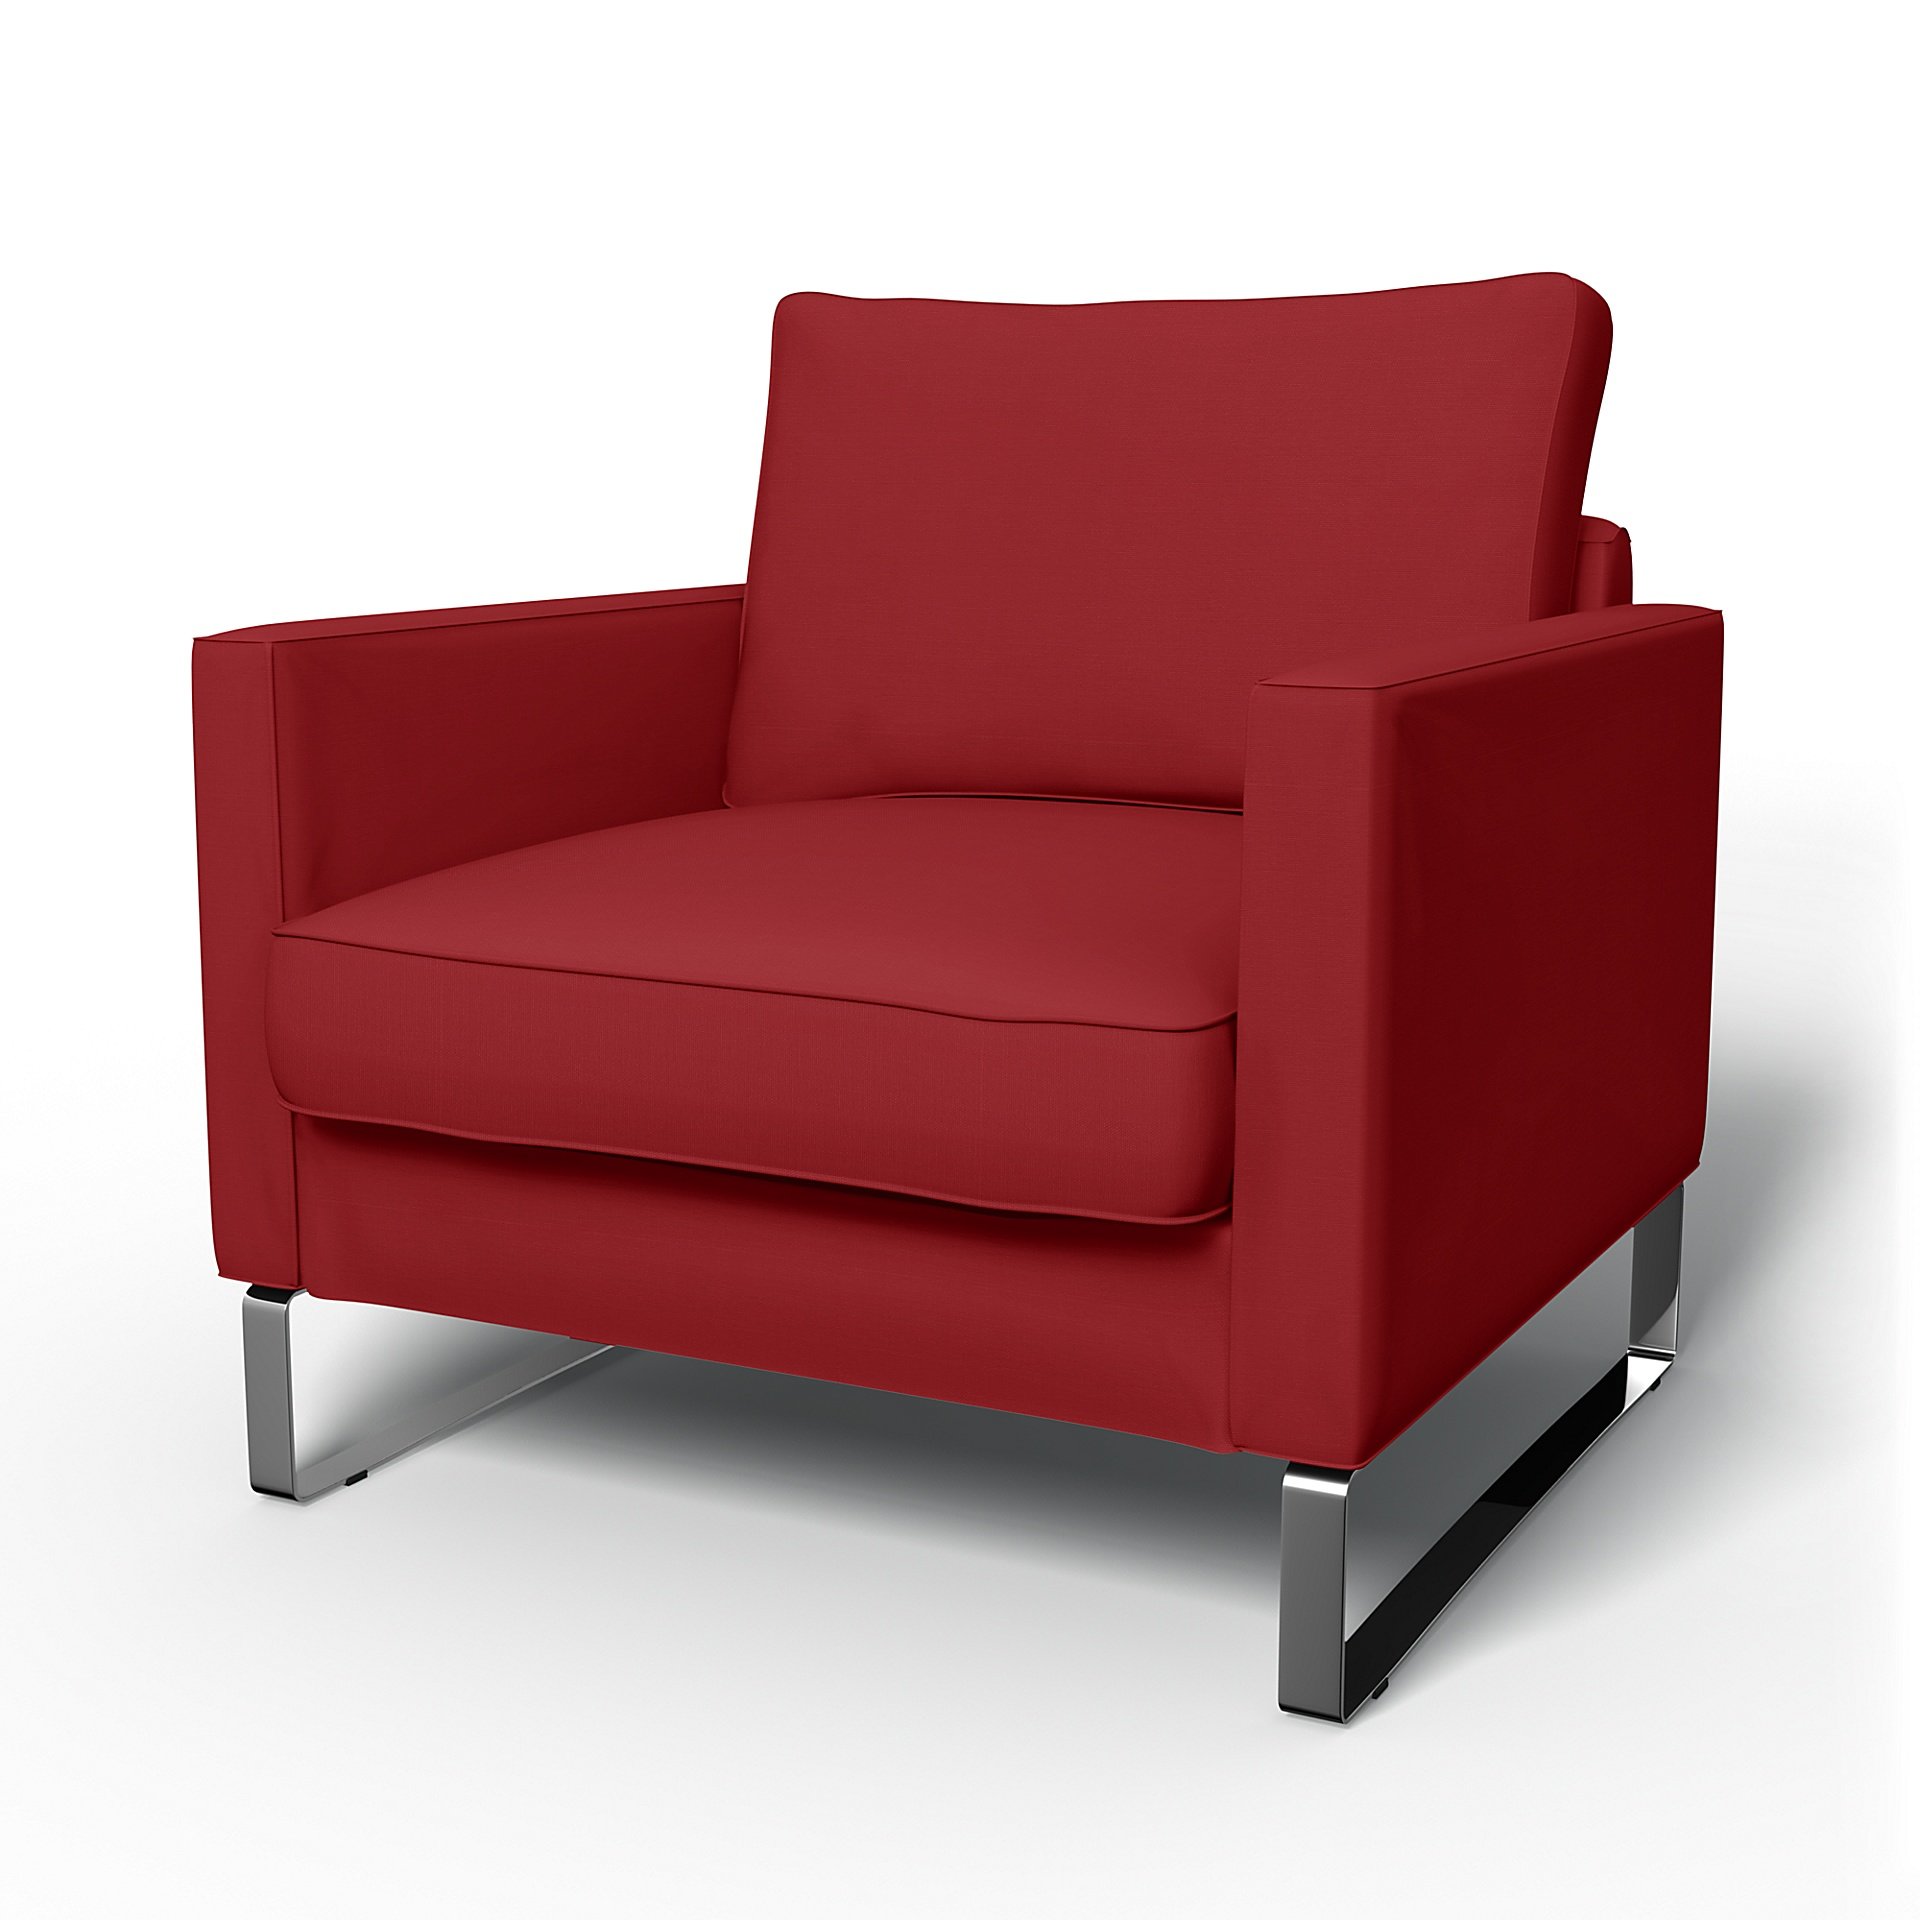 IKEA - Mellby Armchair Cover, Scarlet Red, Cotton - Bemz